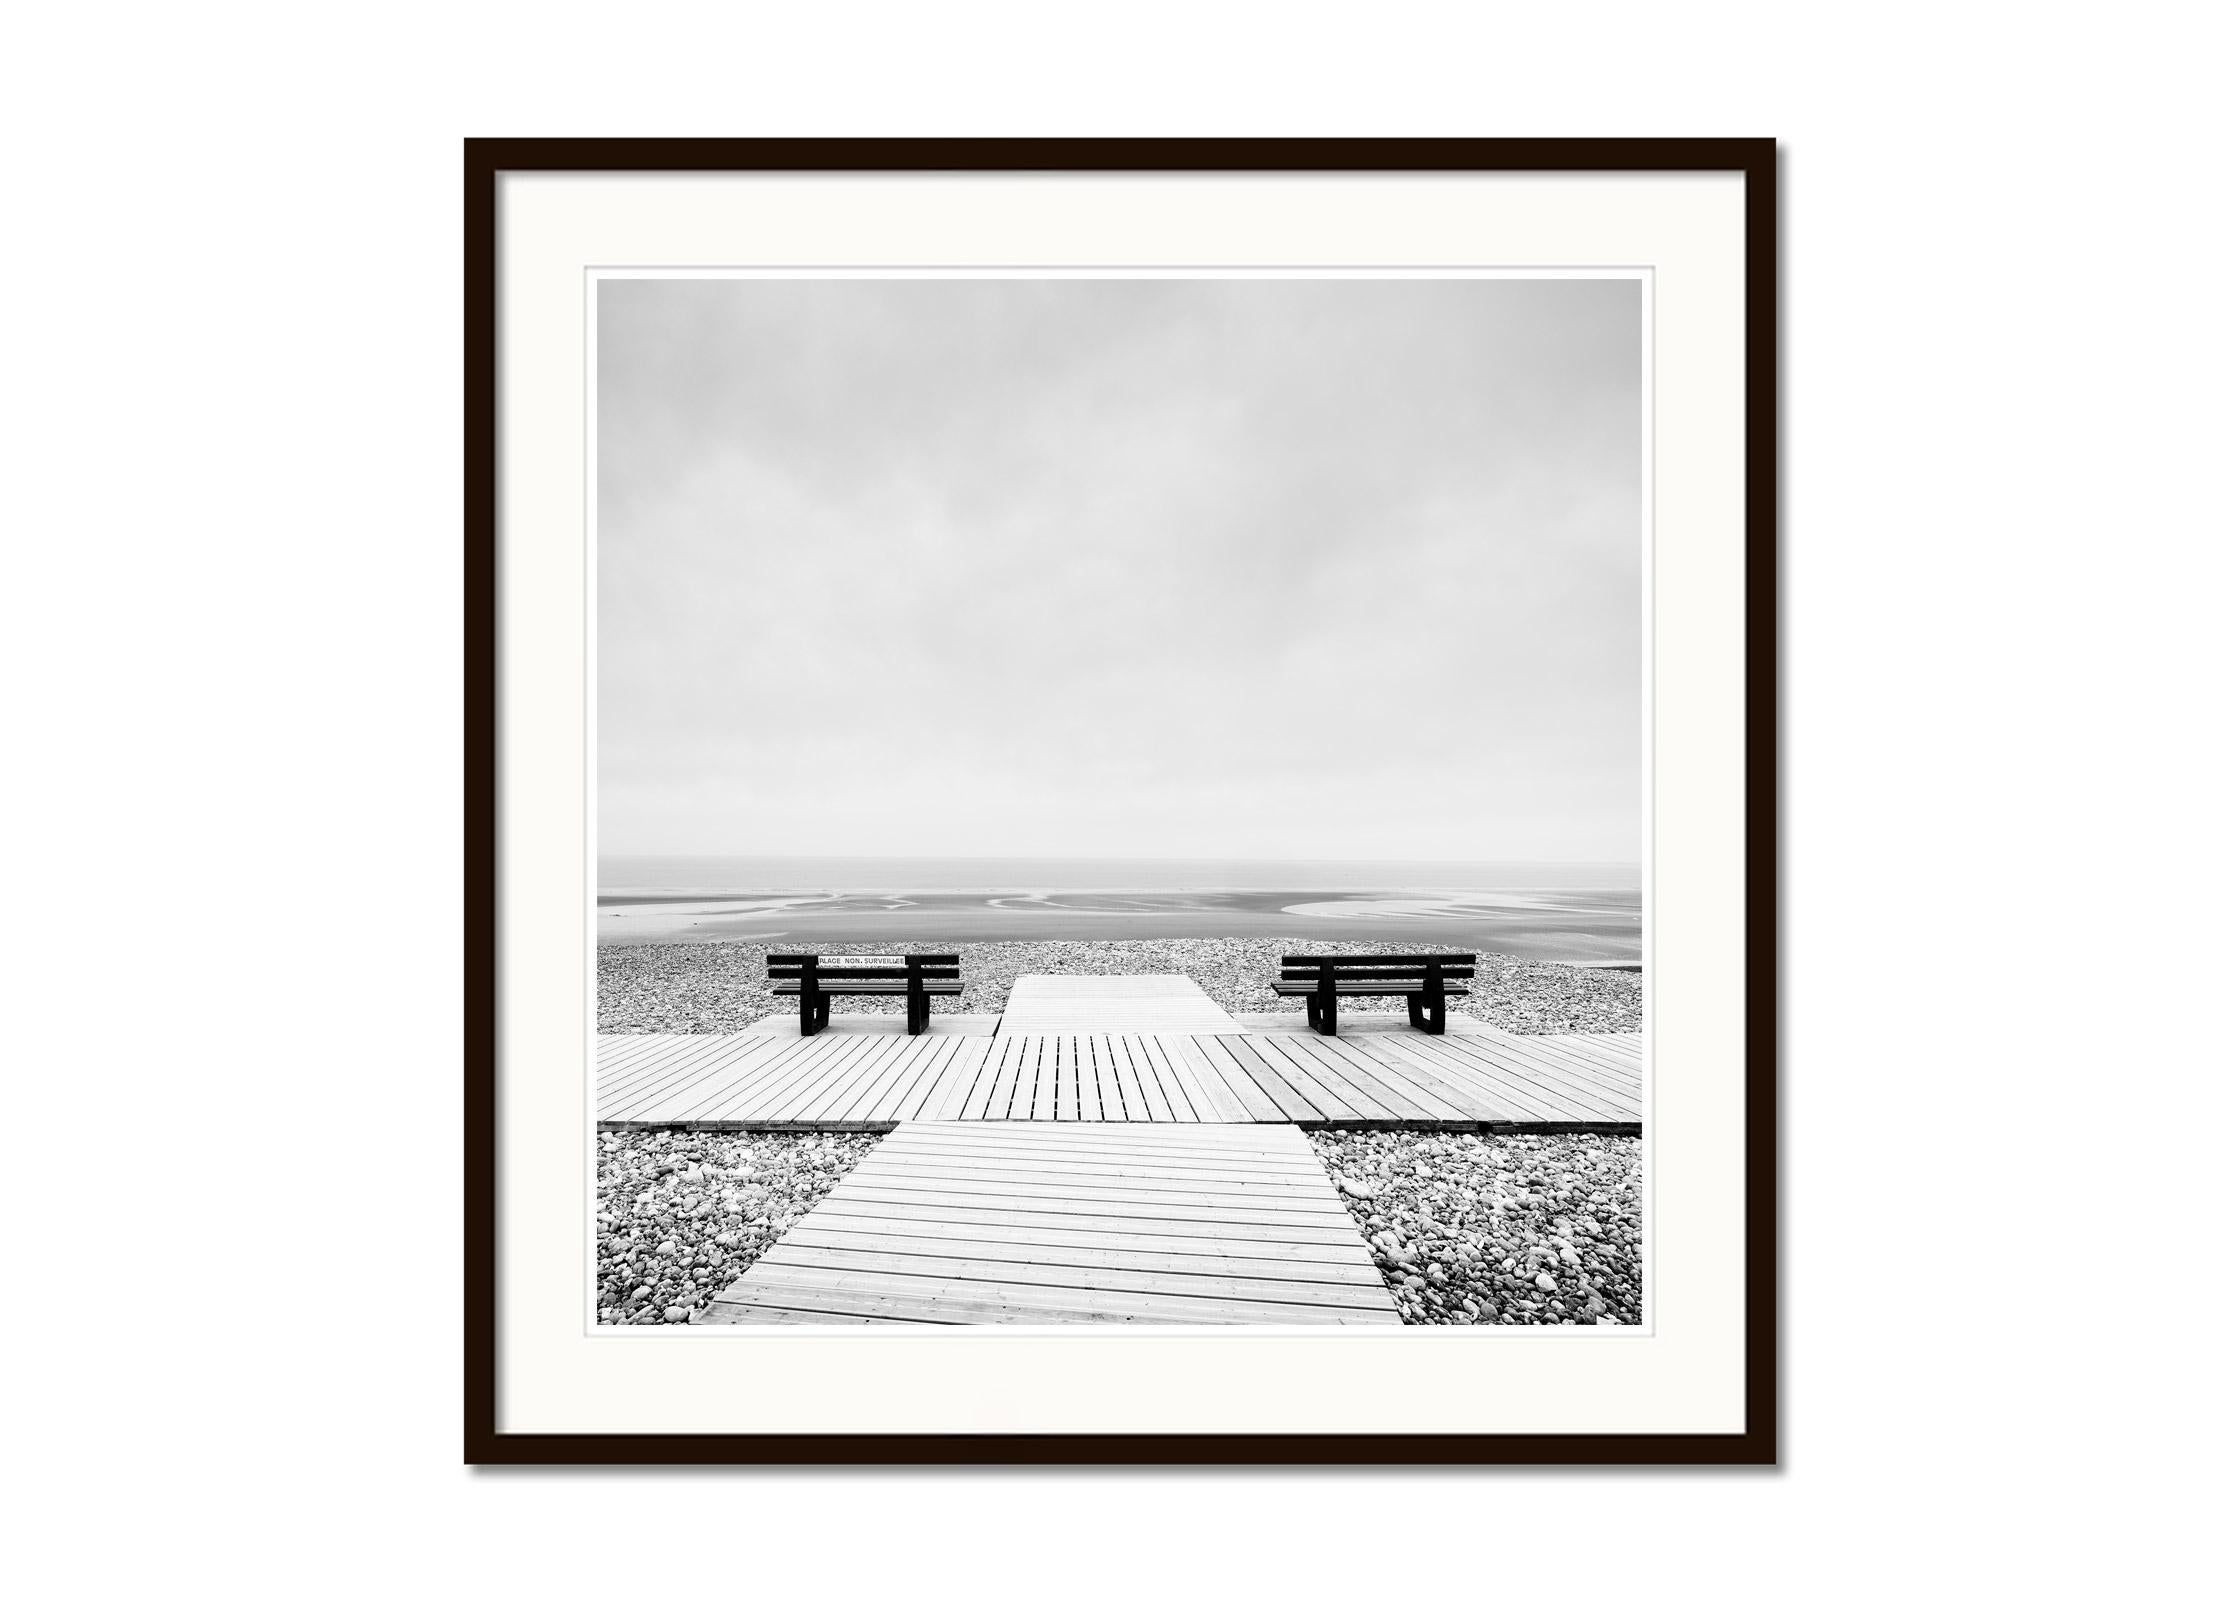 Place to Linger, benches, deserted beach, black white fine art landscape print - Gray Landscape Print by Gerald Berghammer